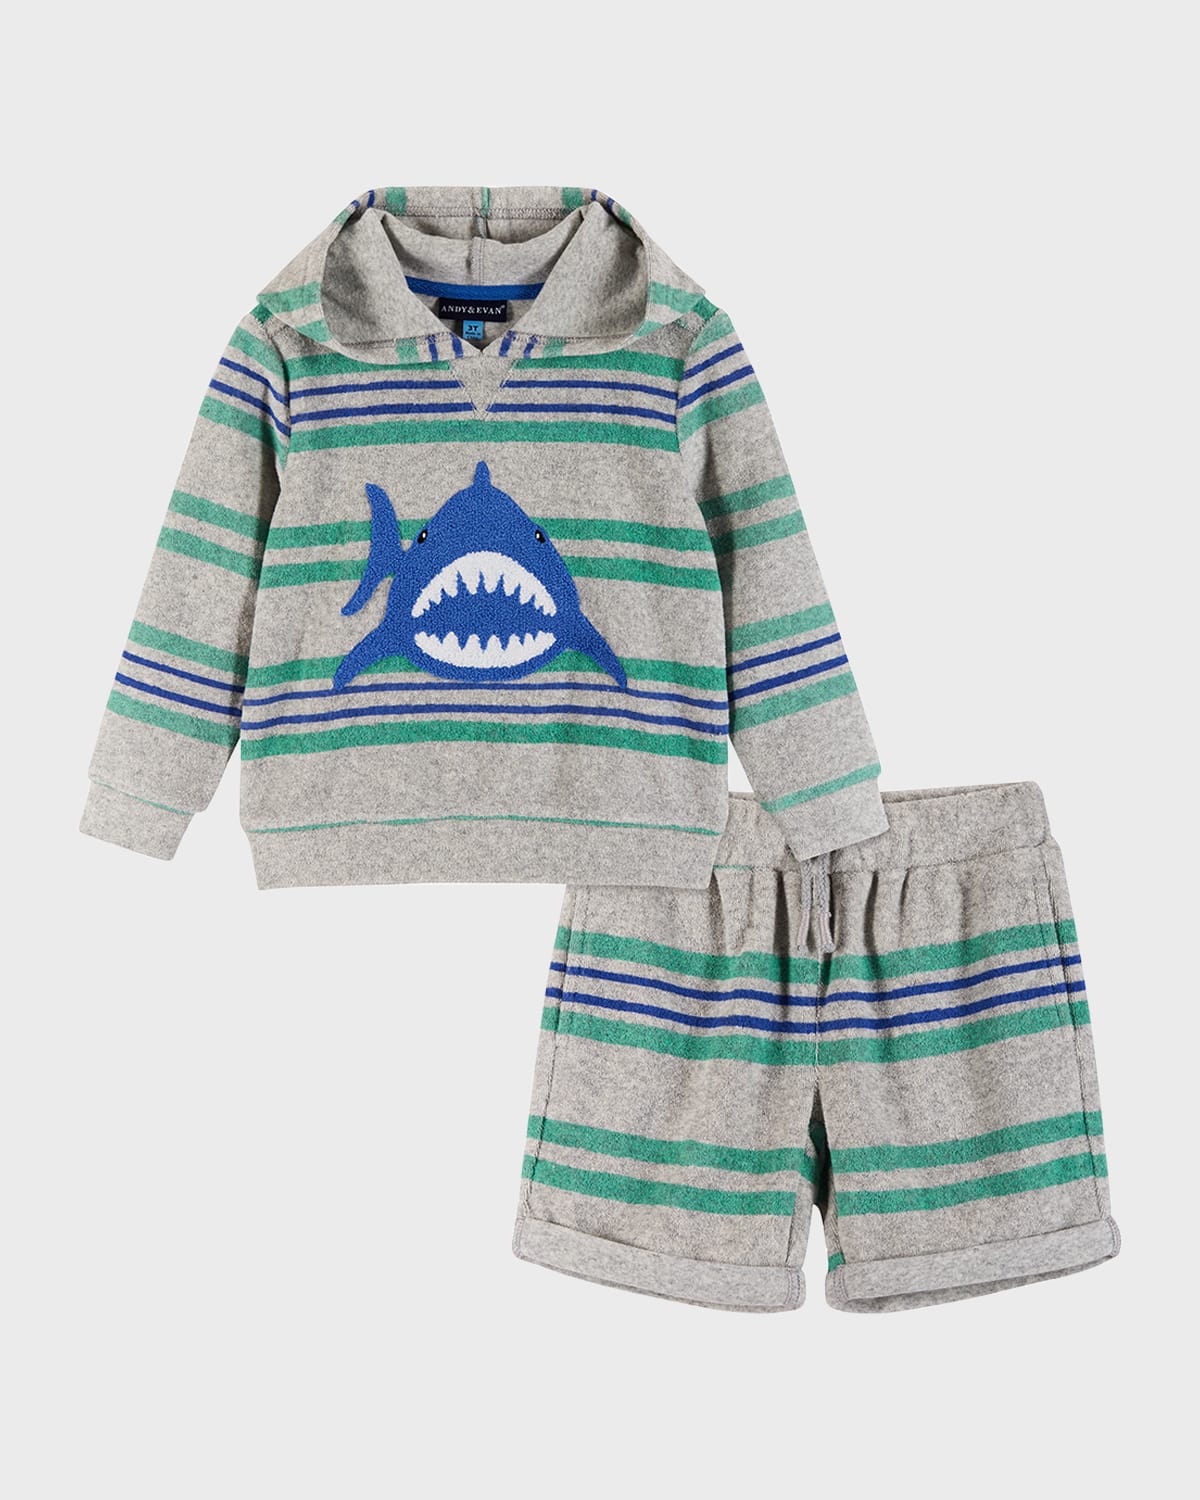 ANDY & EVAN BOY'S SHARK GRAPHIC FRENCH TERRY COVER-UP SET